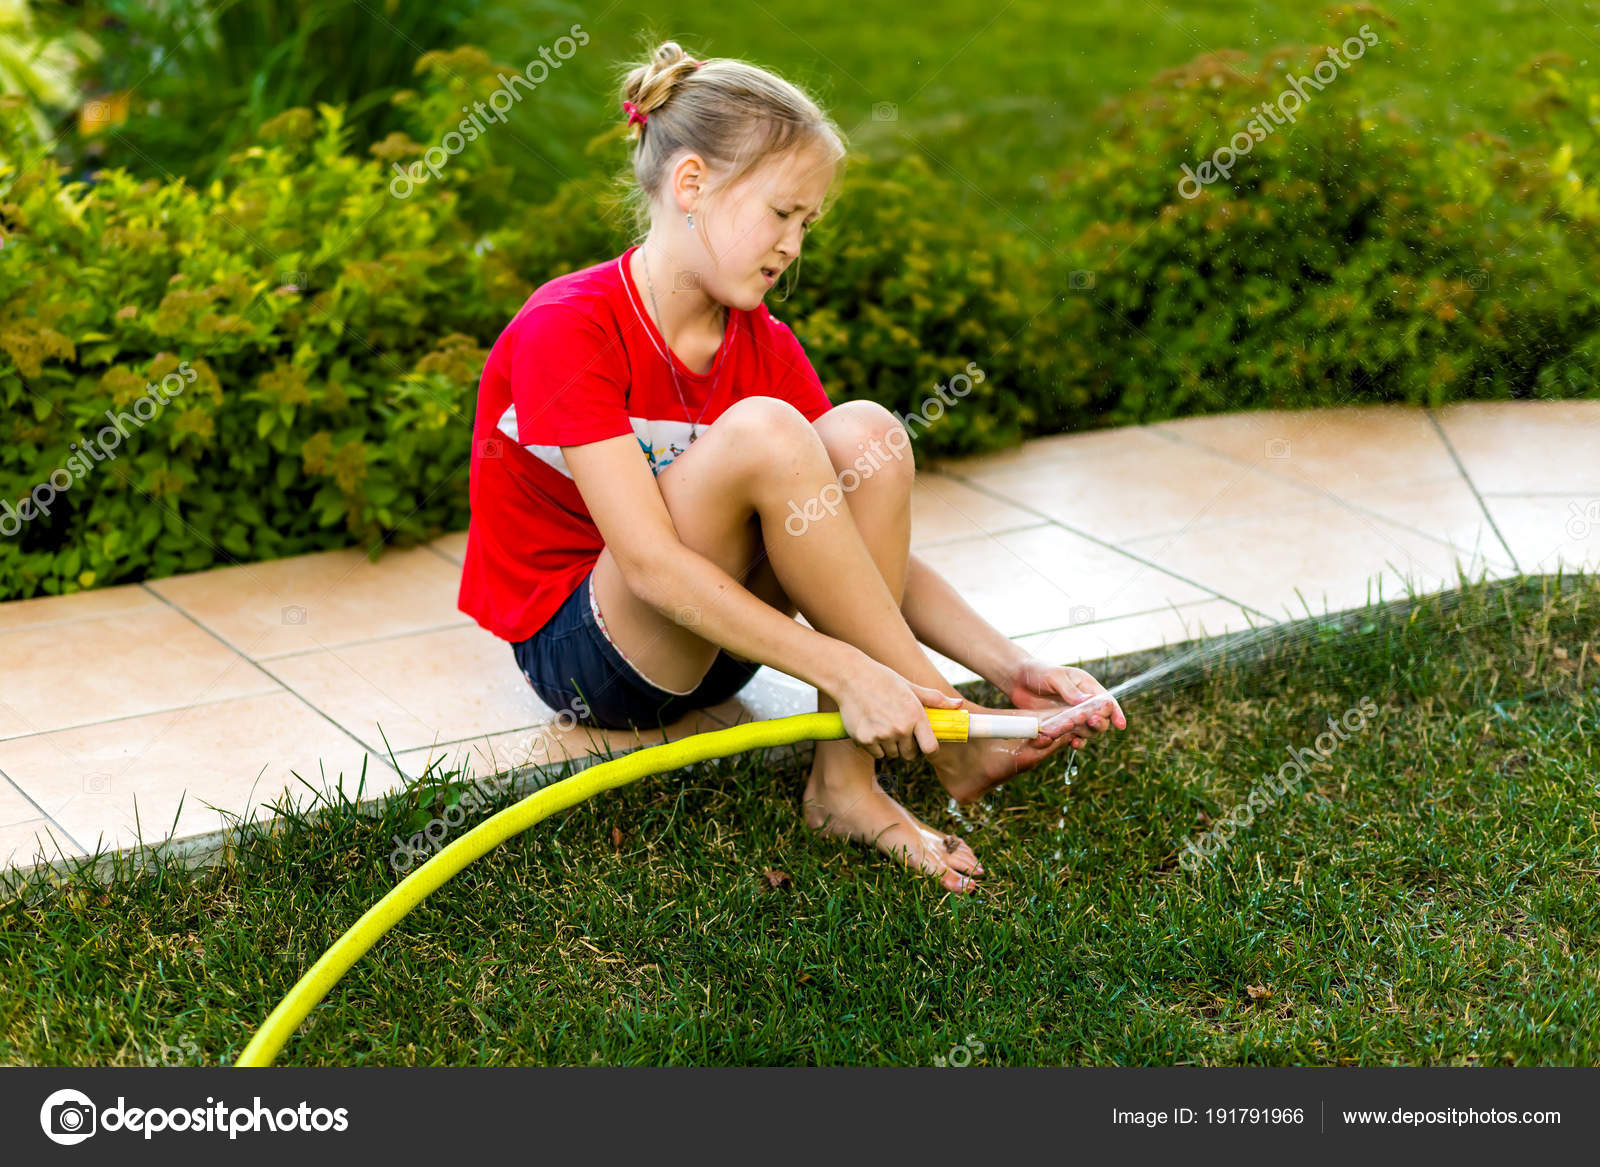 Women Washing Clothes Barefoot Related Keywords & Suggestion